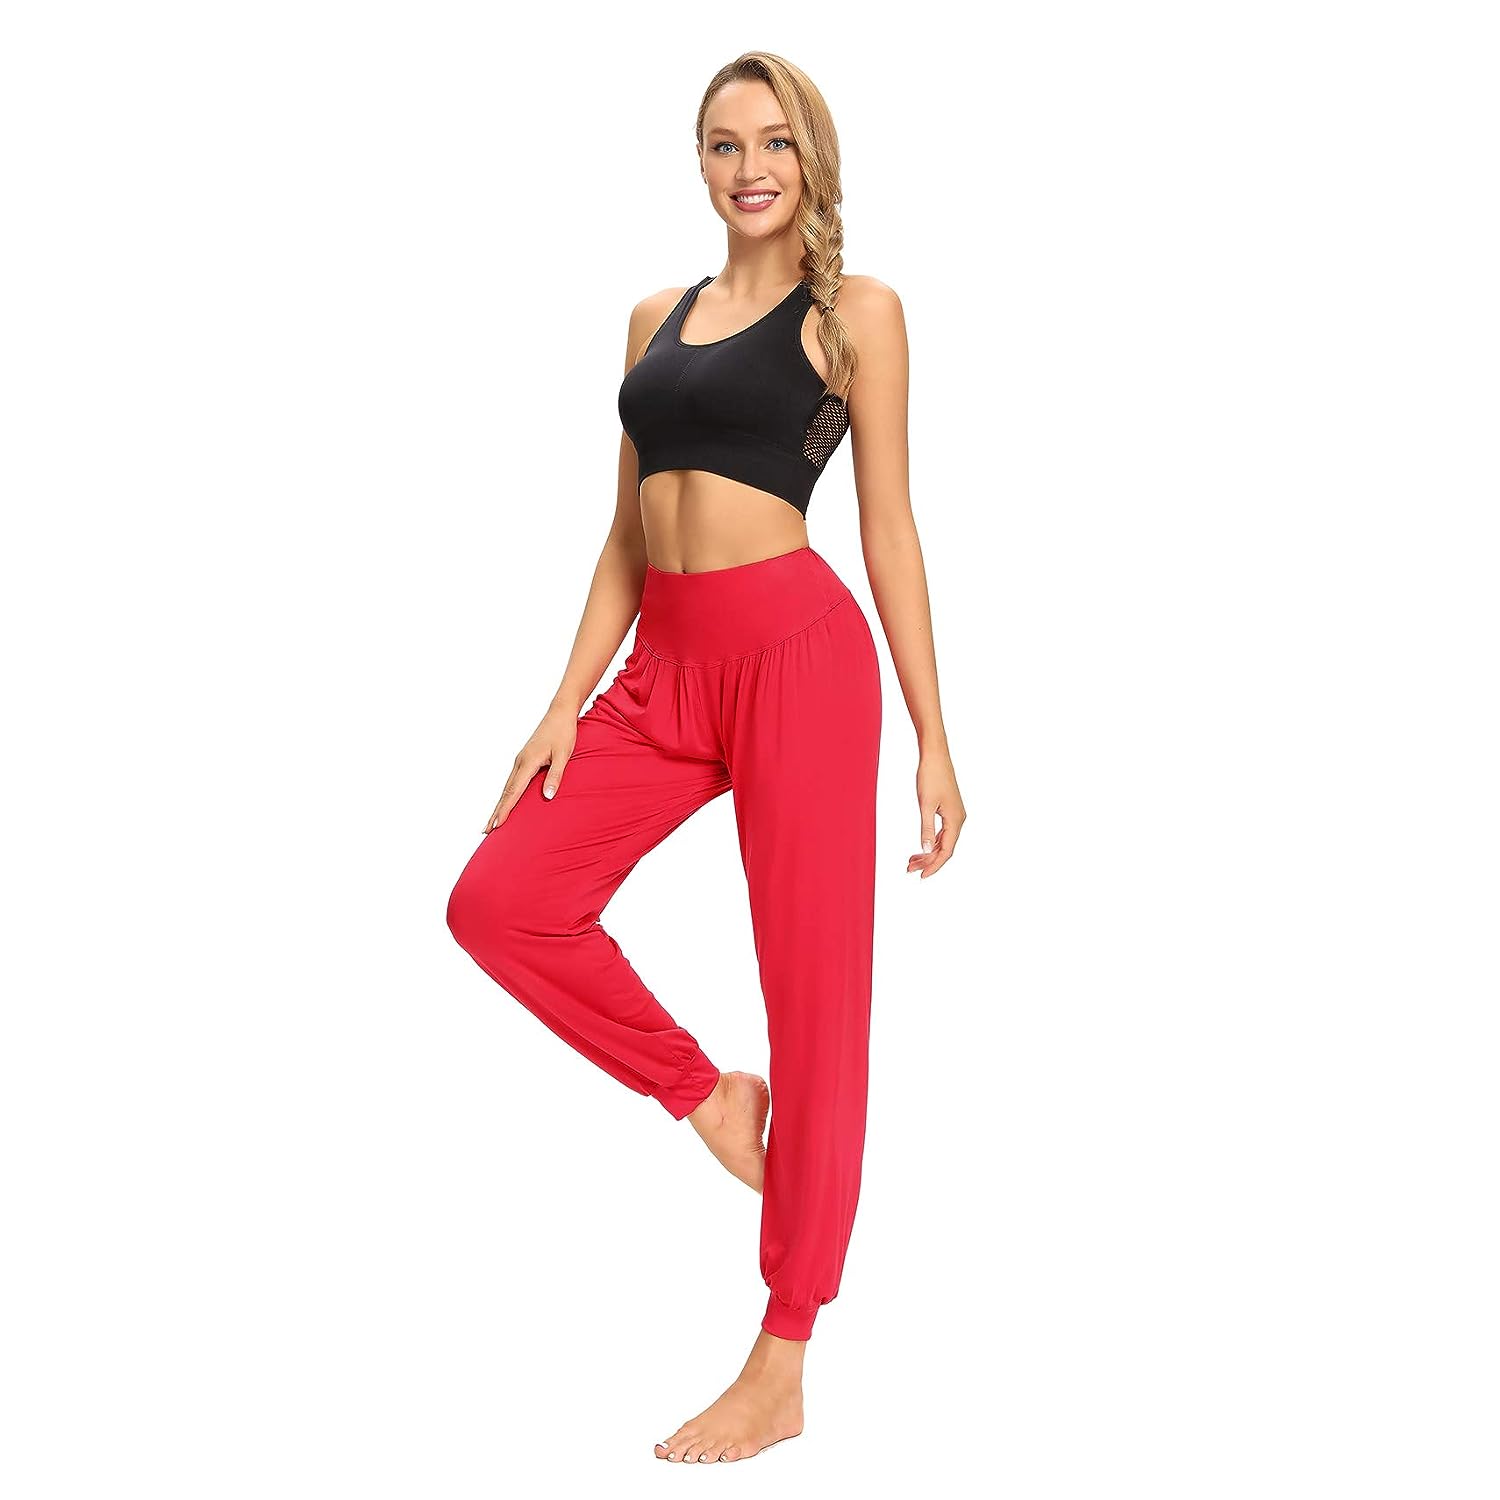 What to wear to pilates